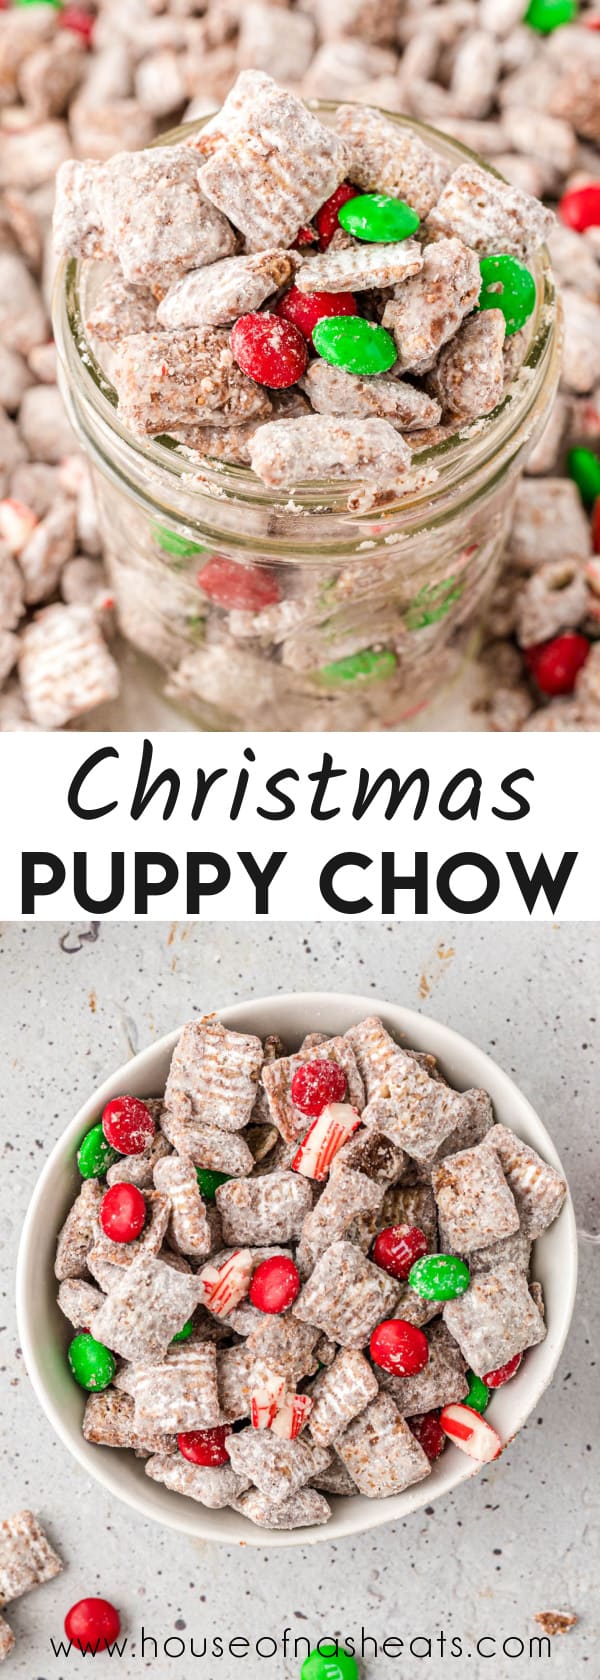 A collage of images of Christmas puppy chow with text overlay.